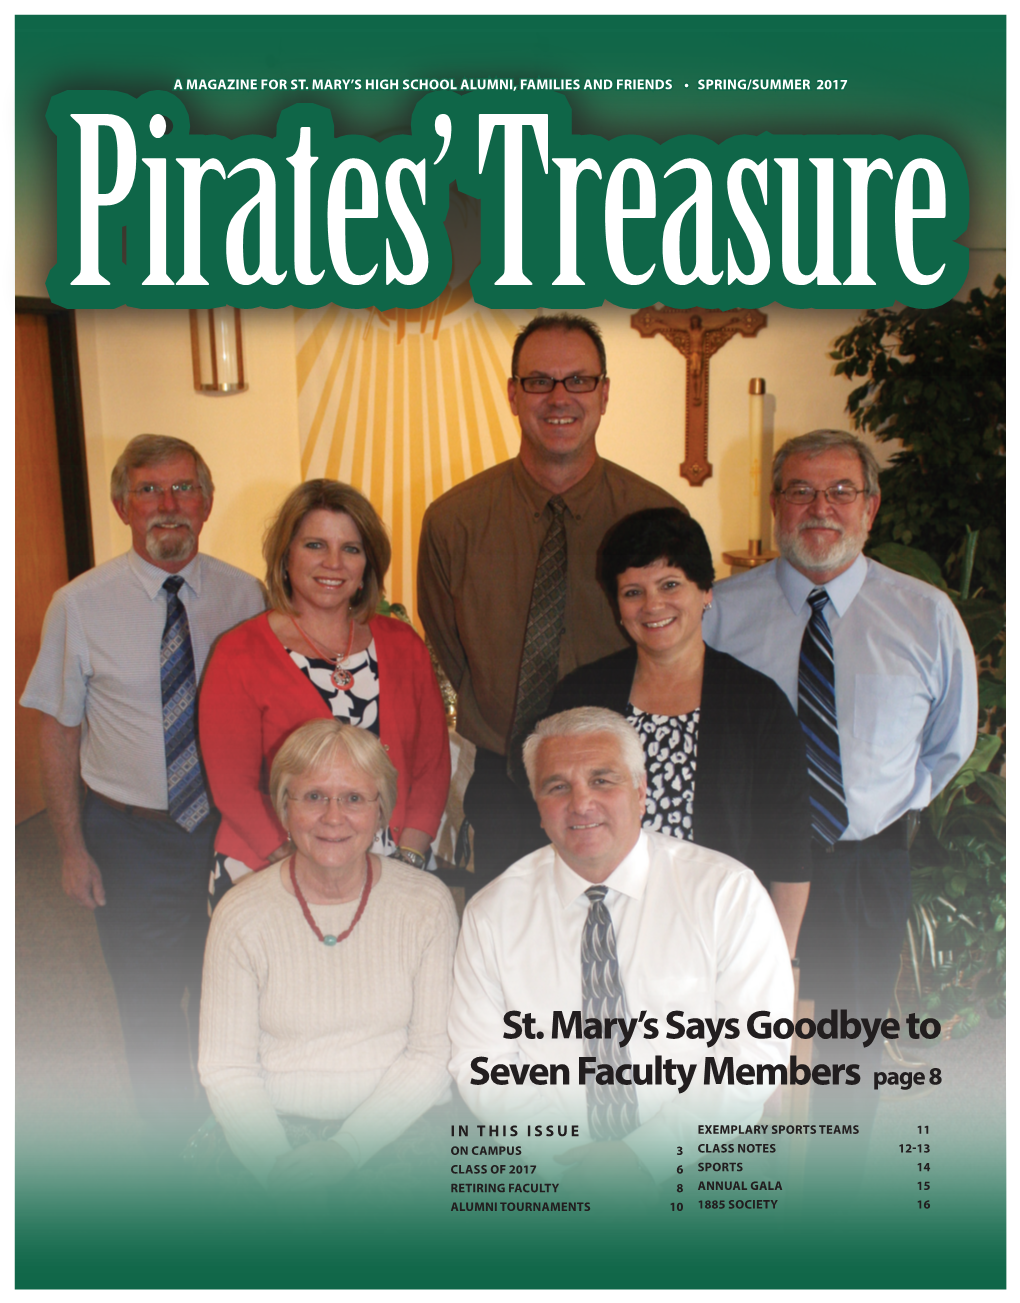 St. Mary's Says Goodbye to Seven Faculty Members Page 8